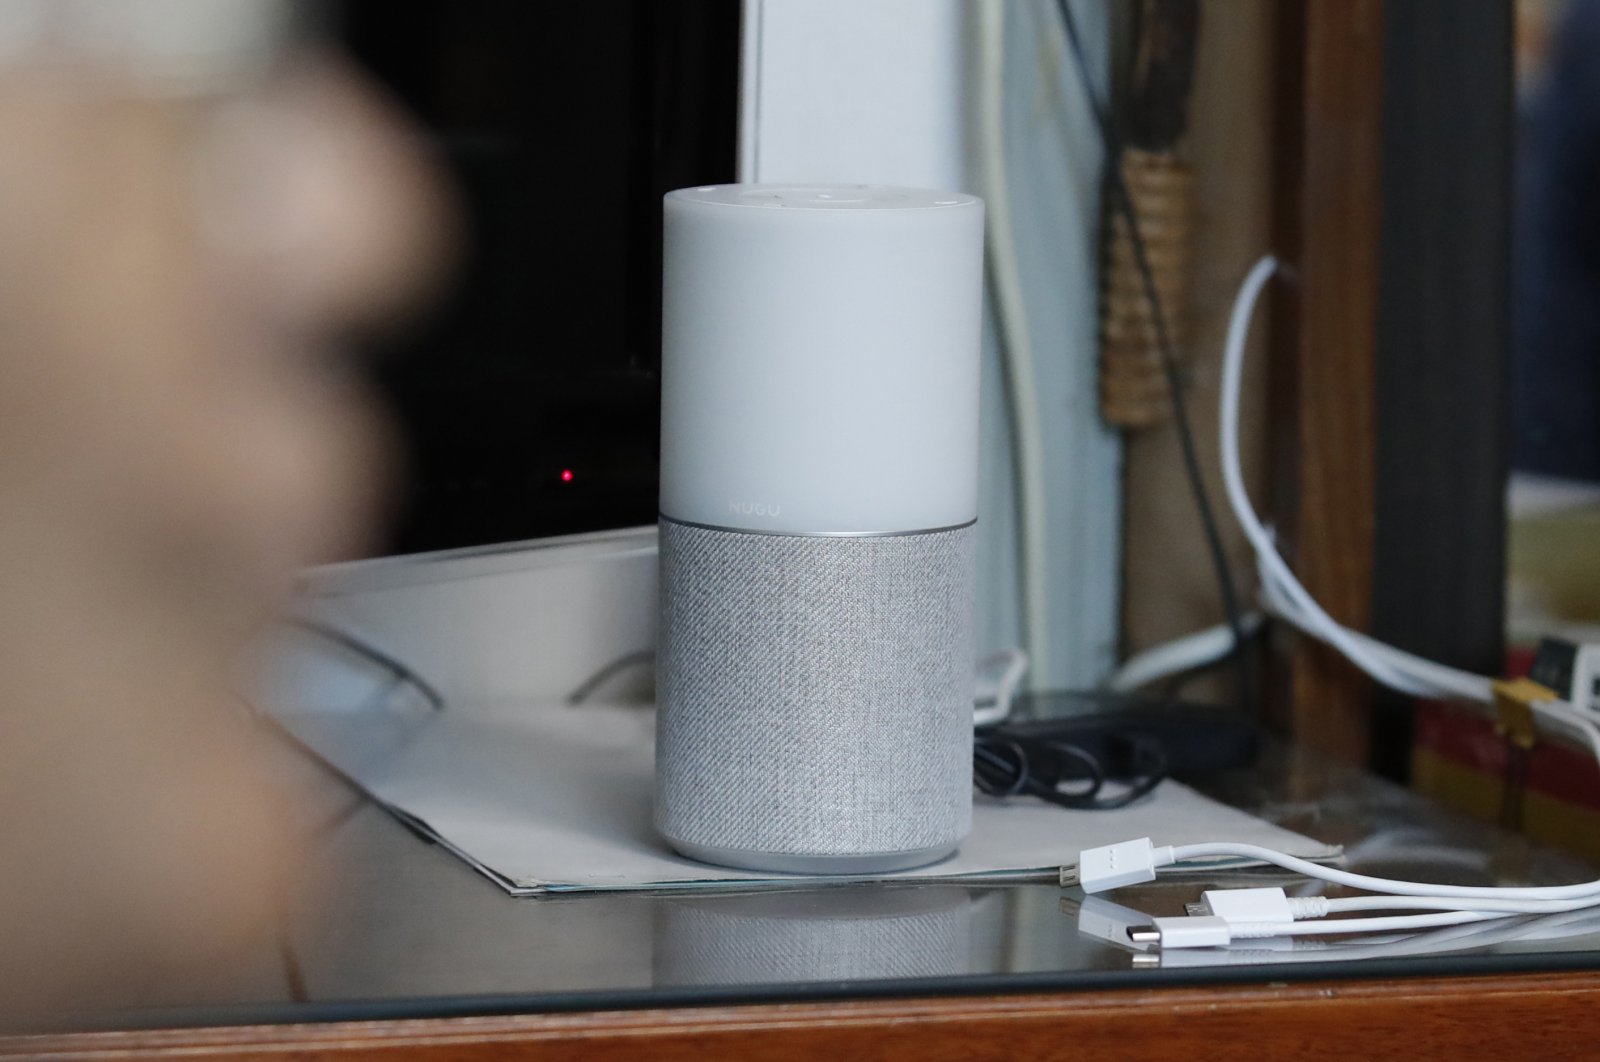 SK Telecom's AI speaker Nugu built with an artificial intelligence called "Aria" and a lamp that turns blue when processing voice commands for news, music and internet searches, is seen at a senior citizen's home in Seoul, South Korea, on May 13, 2020. (AP Photo)